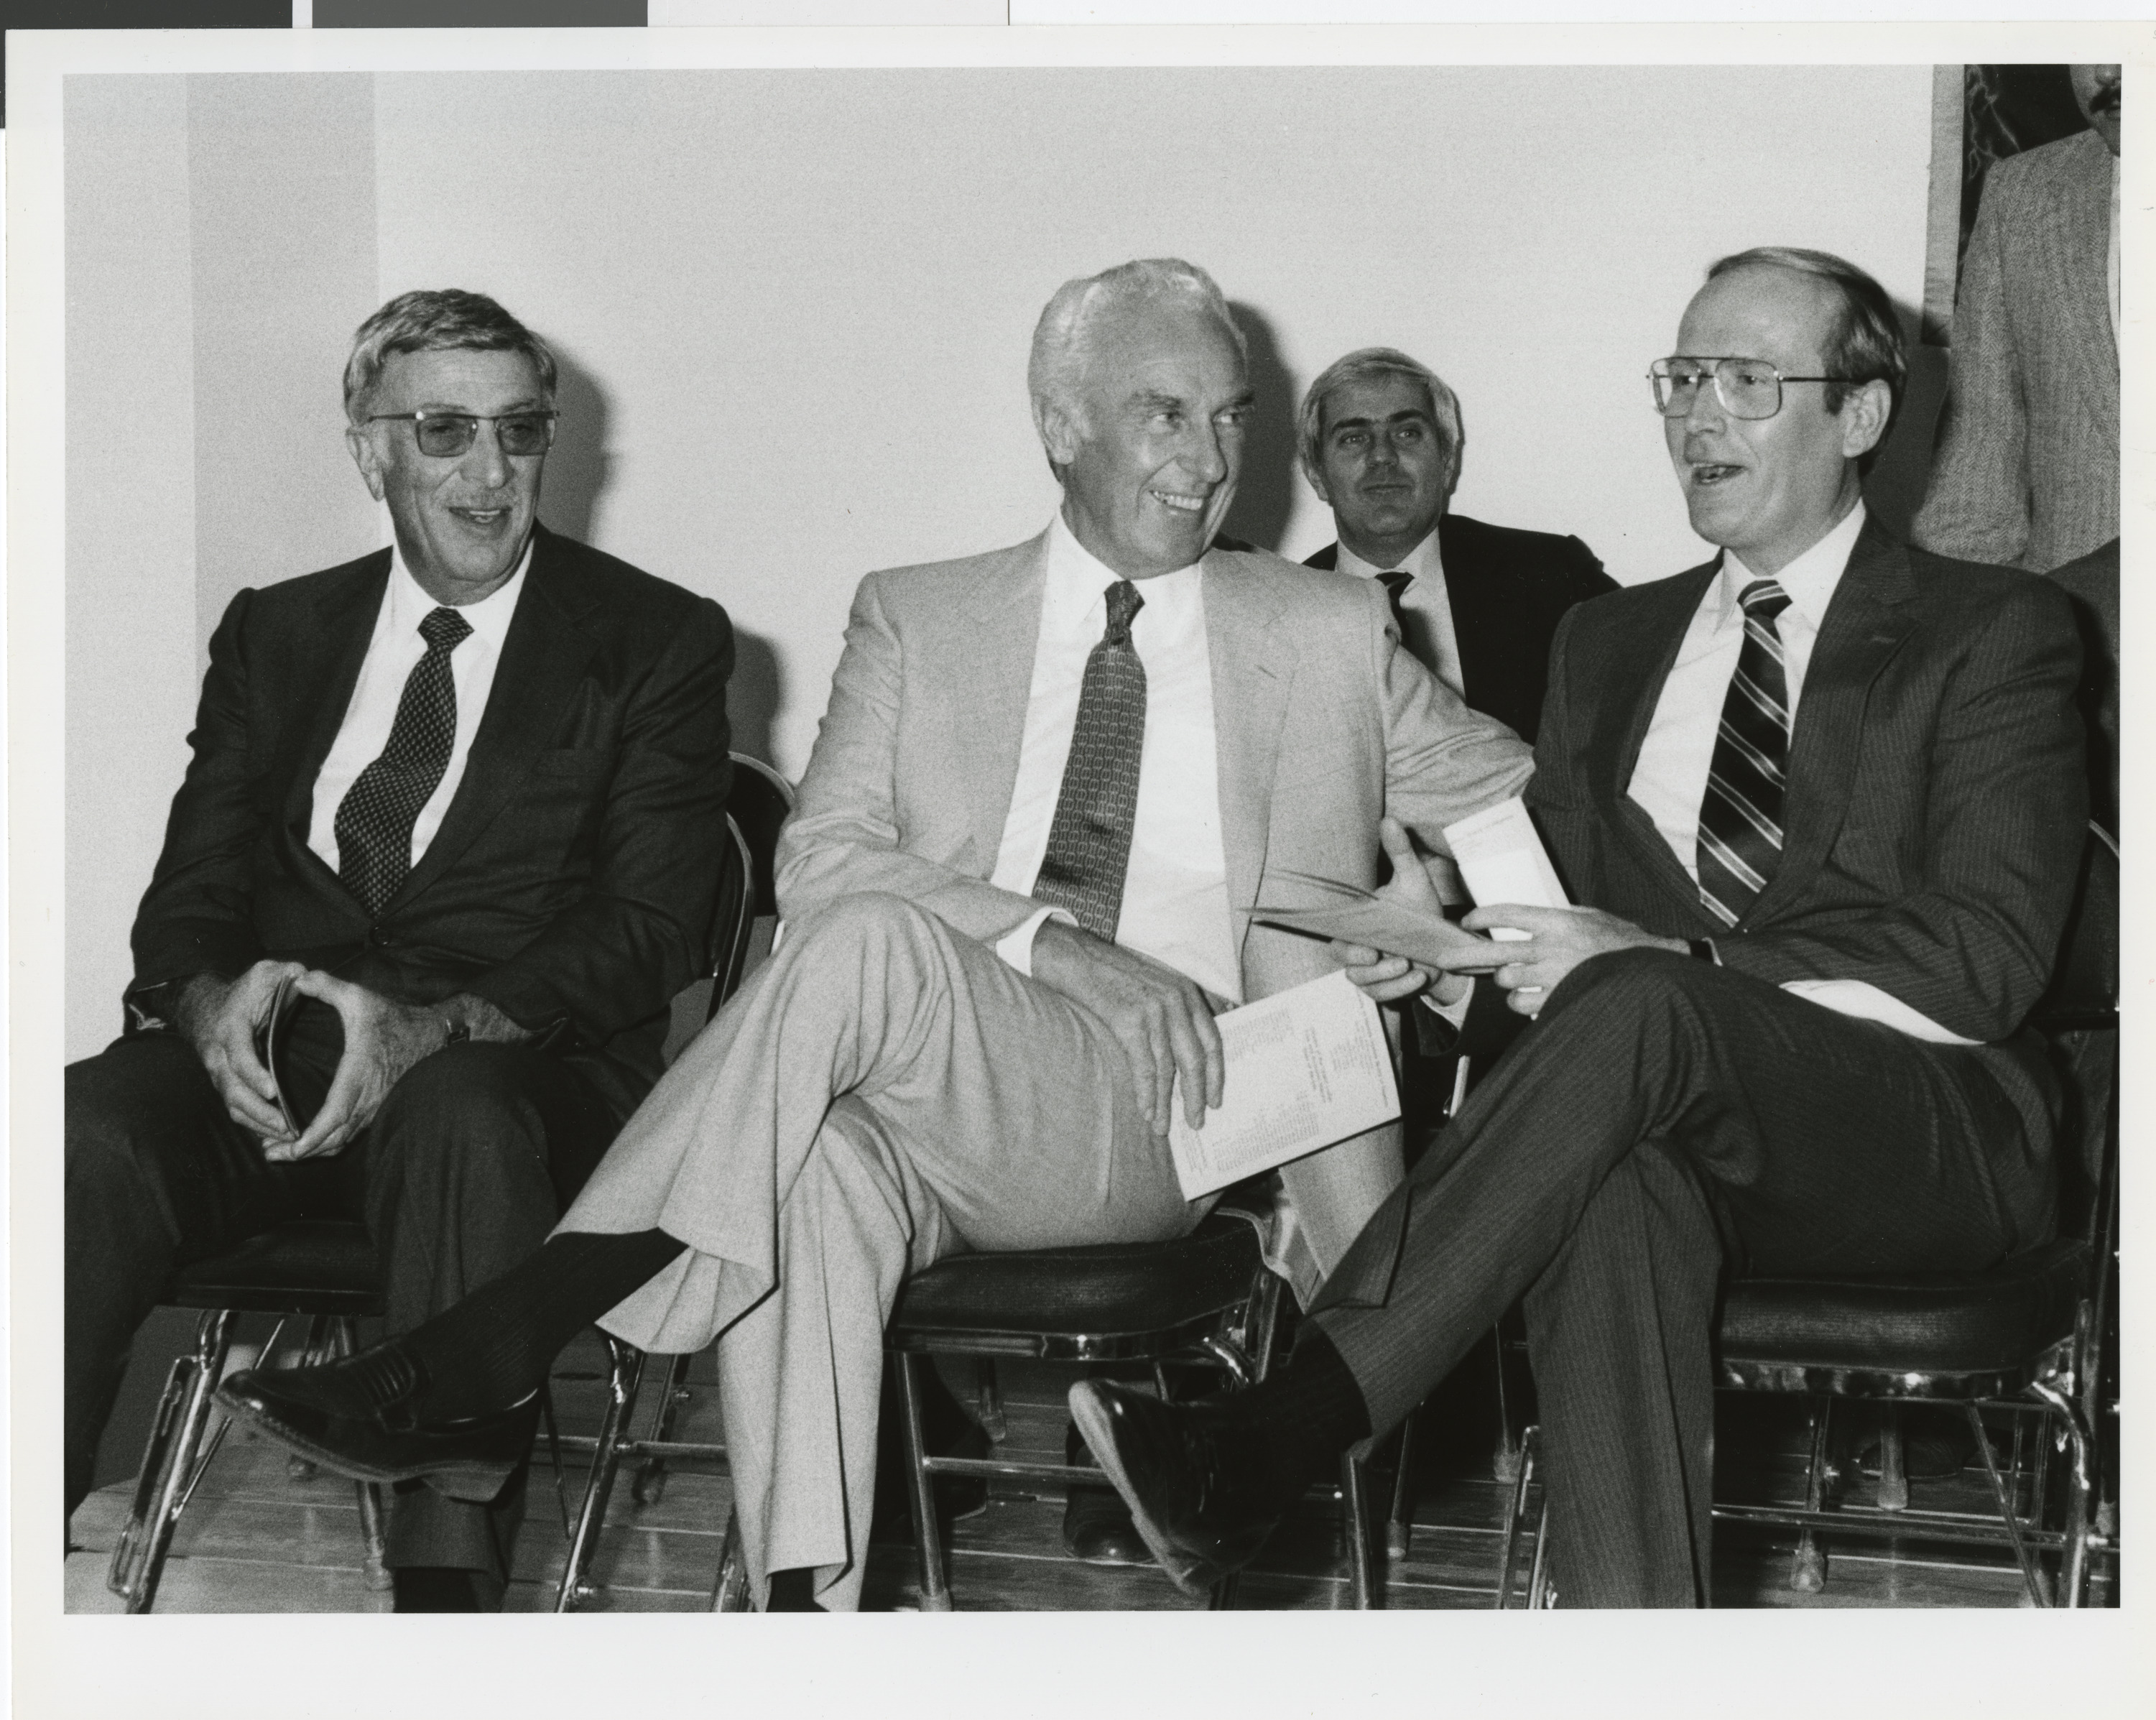 Photograph of Jerry Mack, Parry Thomas and Governor Richard Bryan